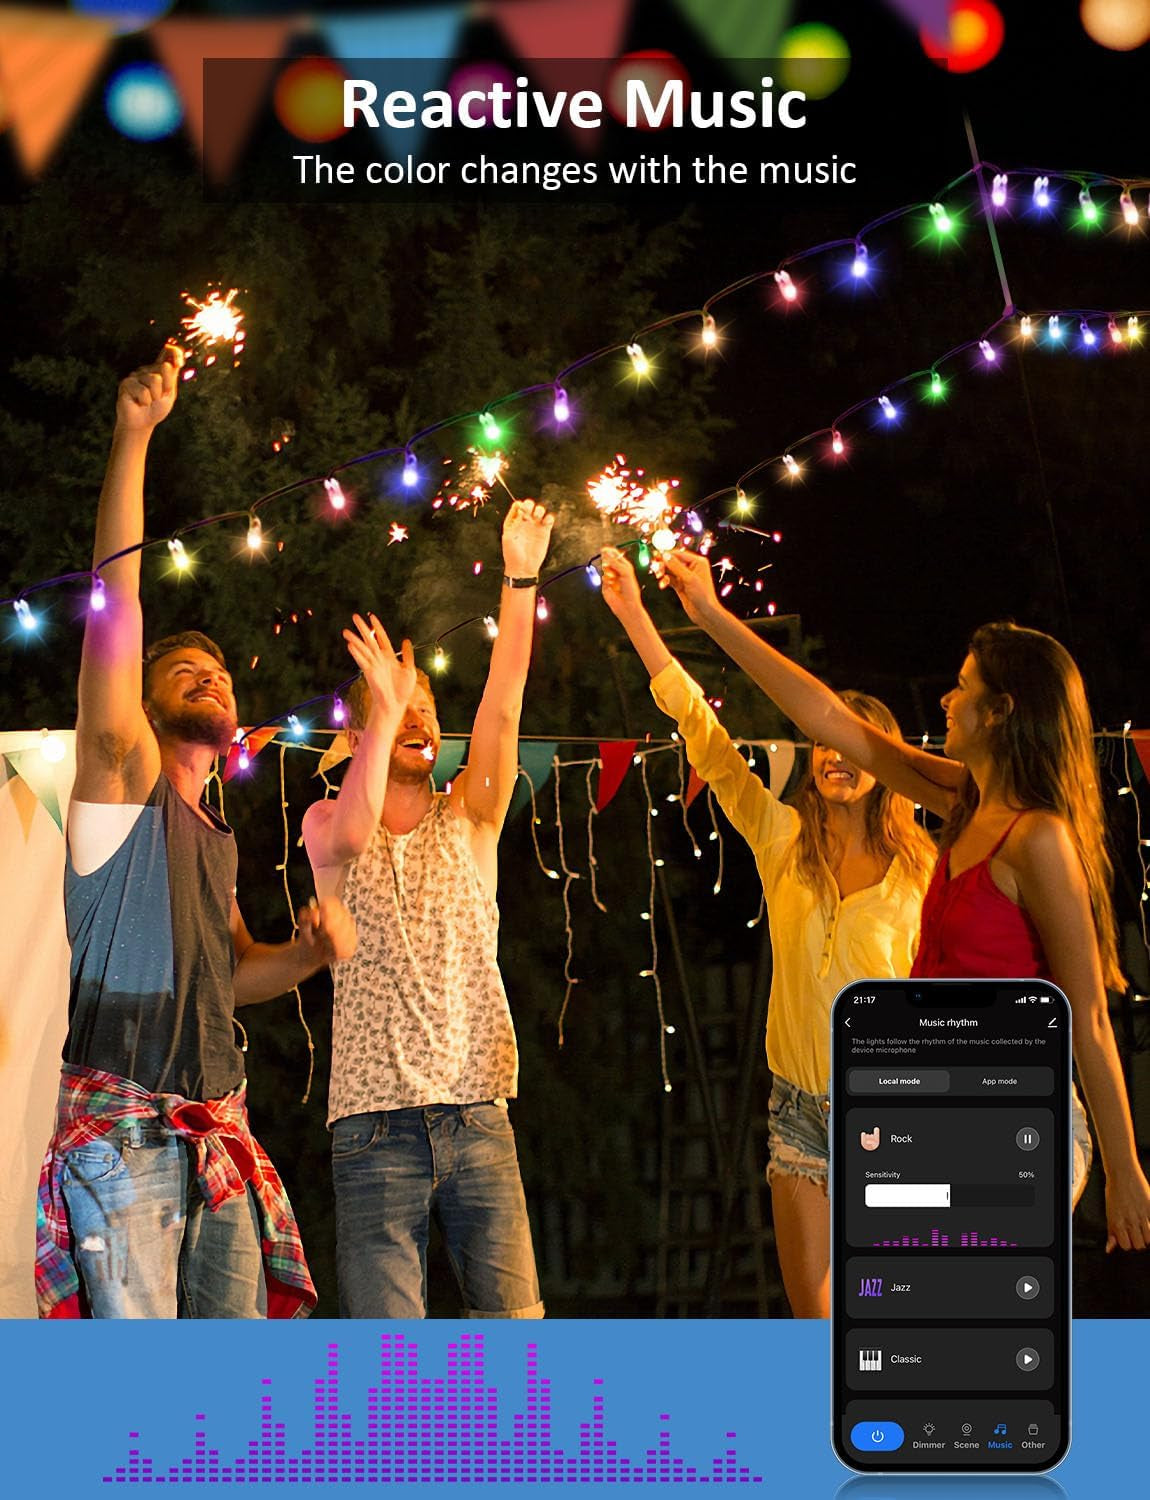 Smart LED Christmas Lights - Smart Twinkly String Lights App Controlled, Dimmable Color Changing Christmas Lights, Xmas Tree Lights Work with Alexa & Google Home for Outdoor Indoor Party Decor